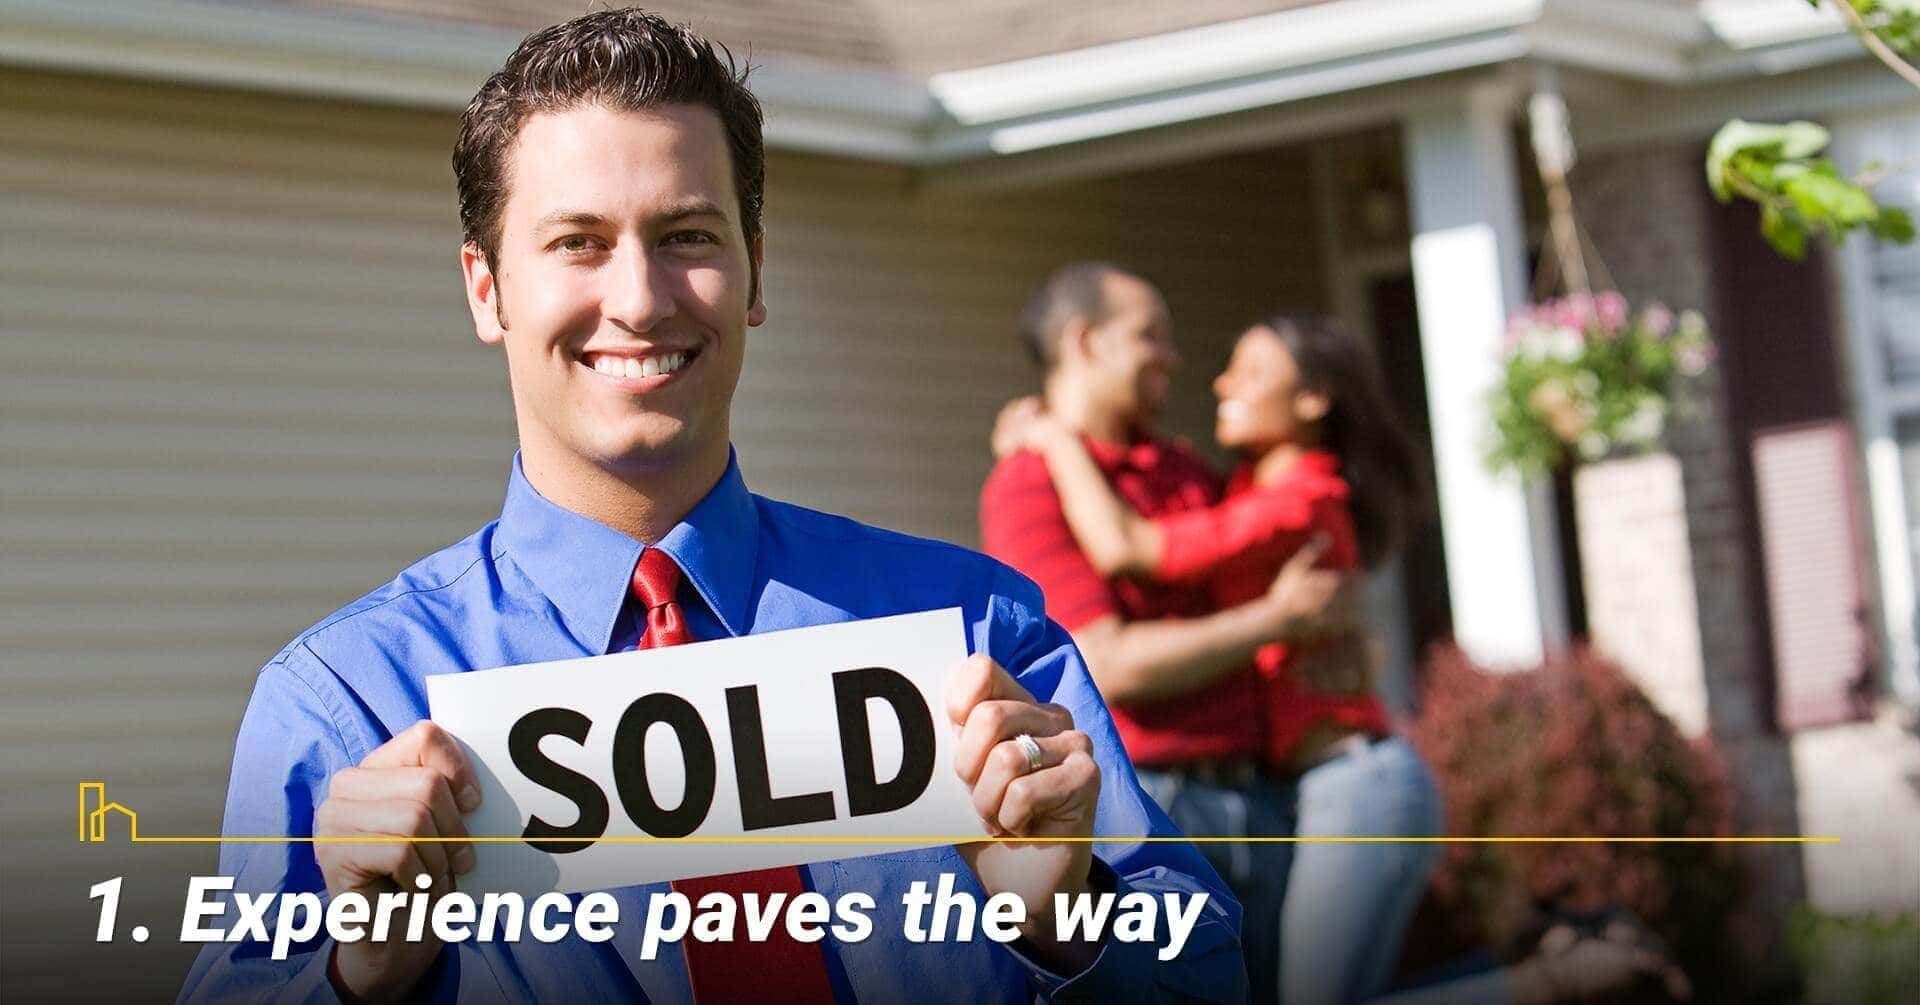 Experience paves the way, experienced agent helps